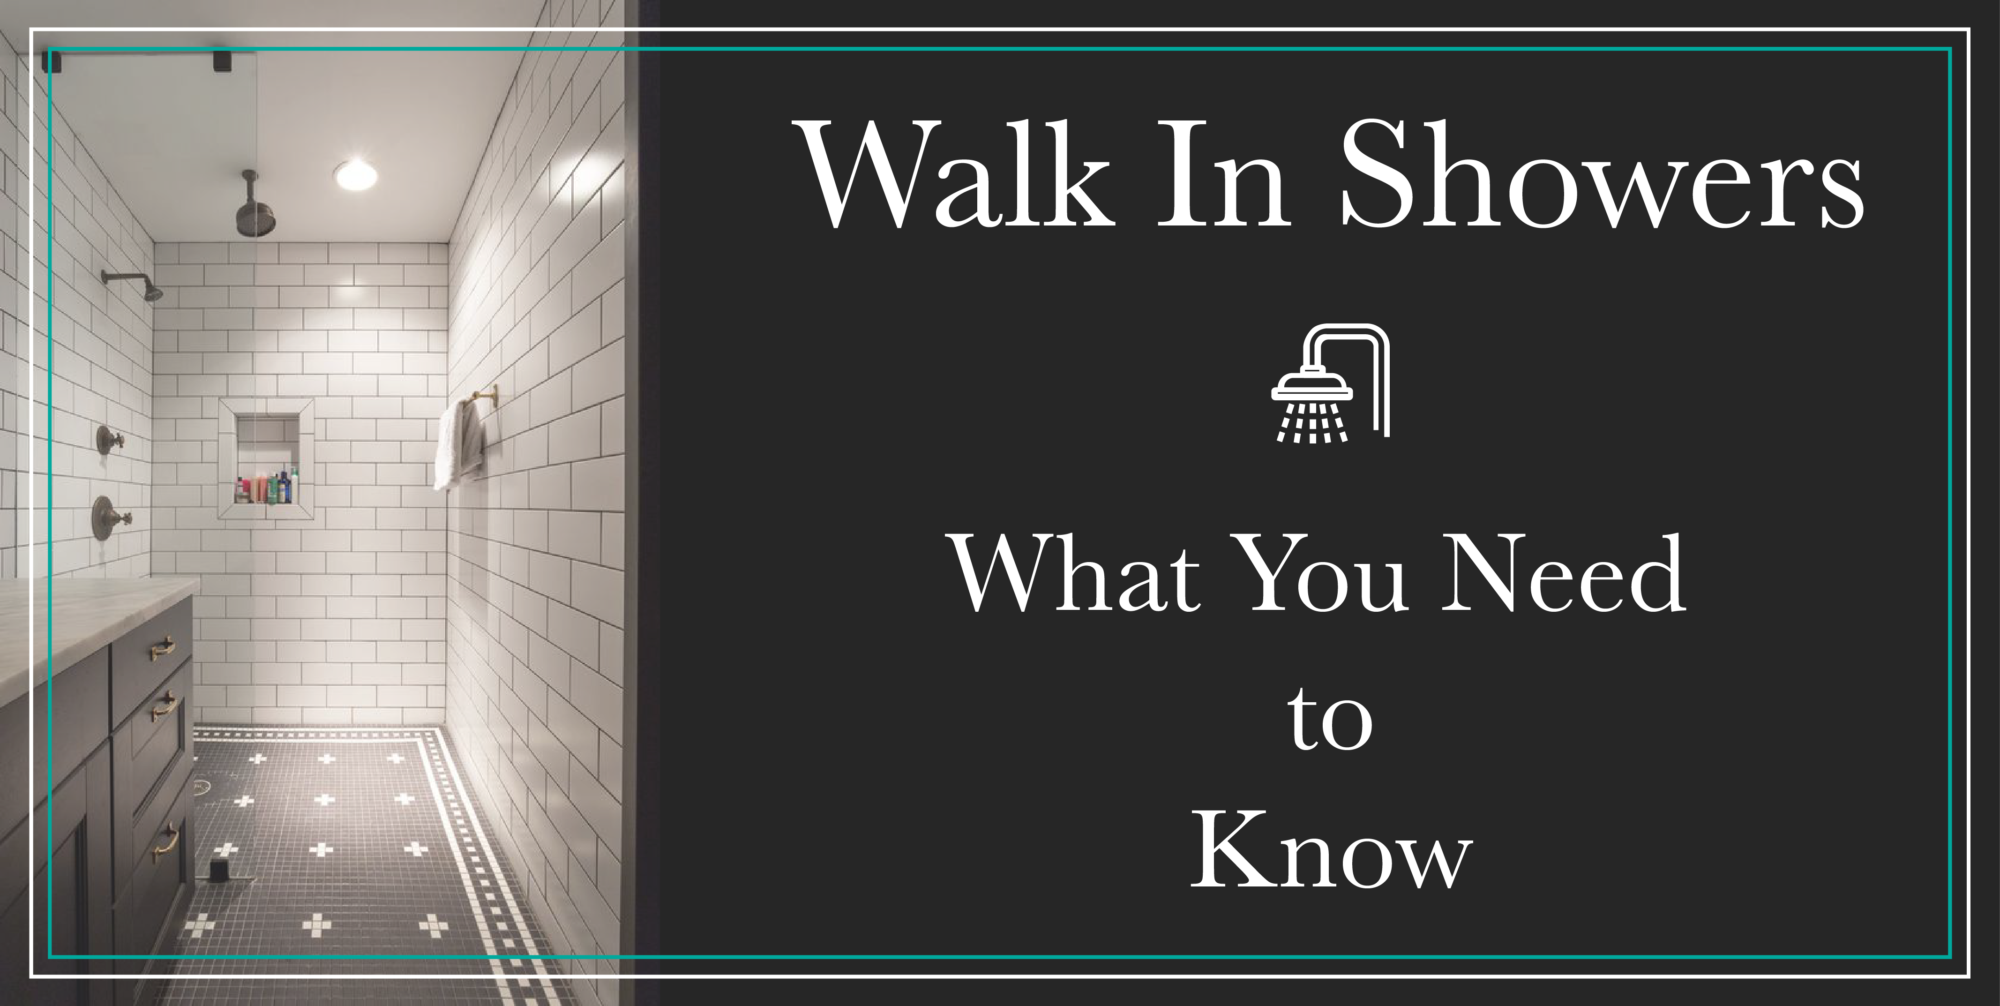 Walk In Showers: What You Need To Know